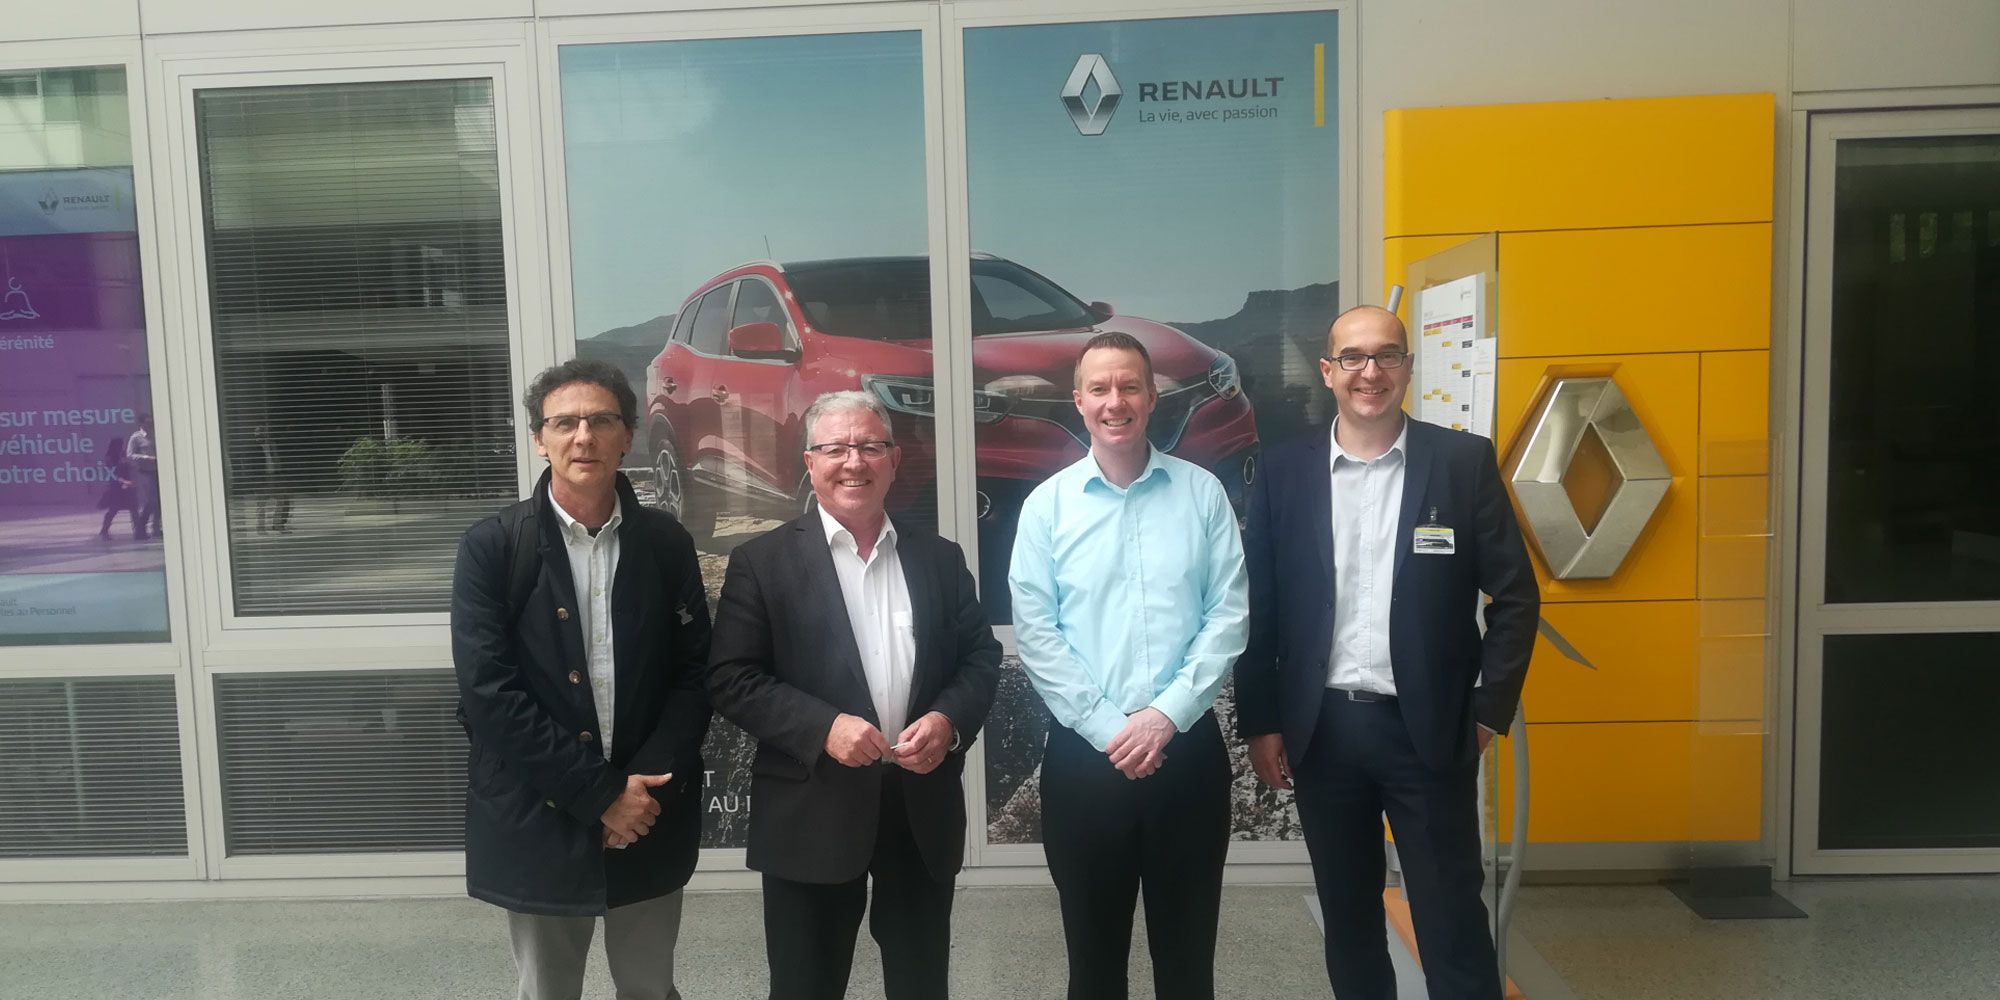 Symposium with Renault